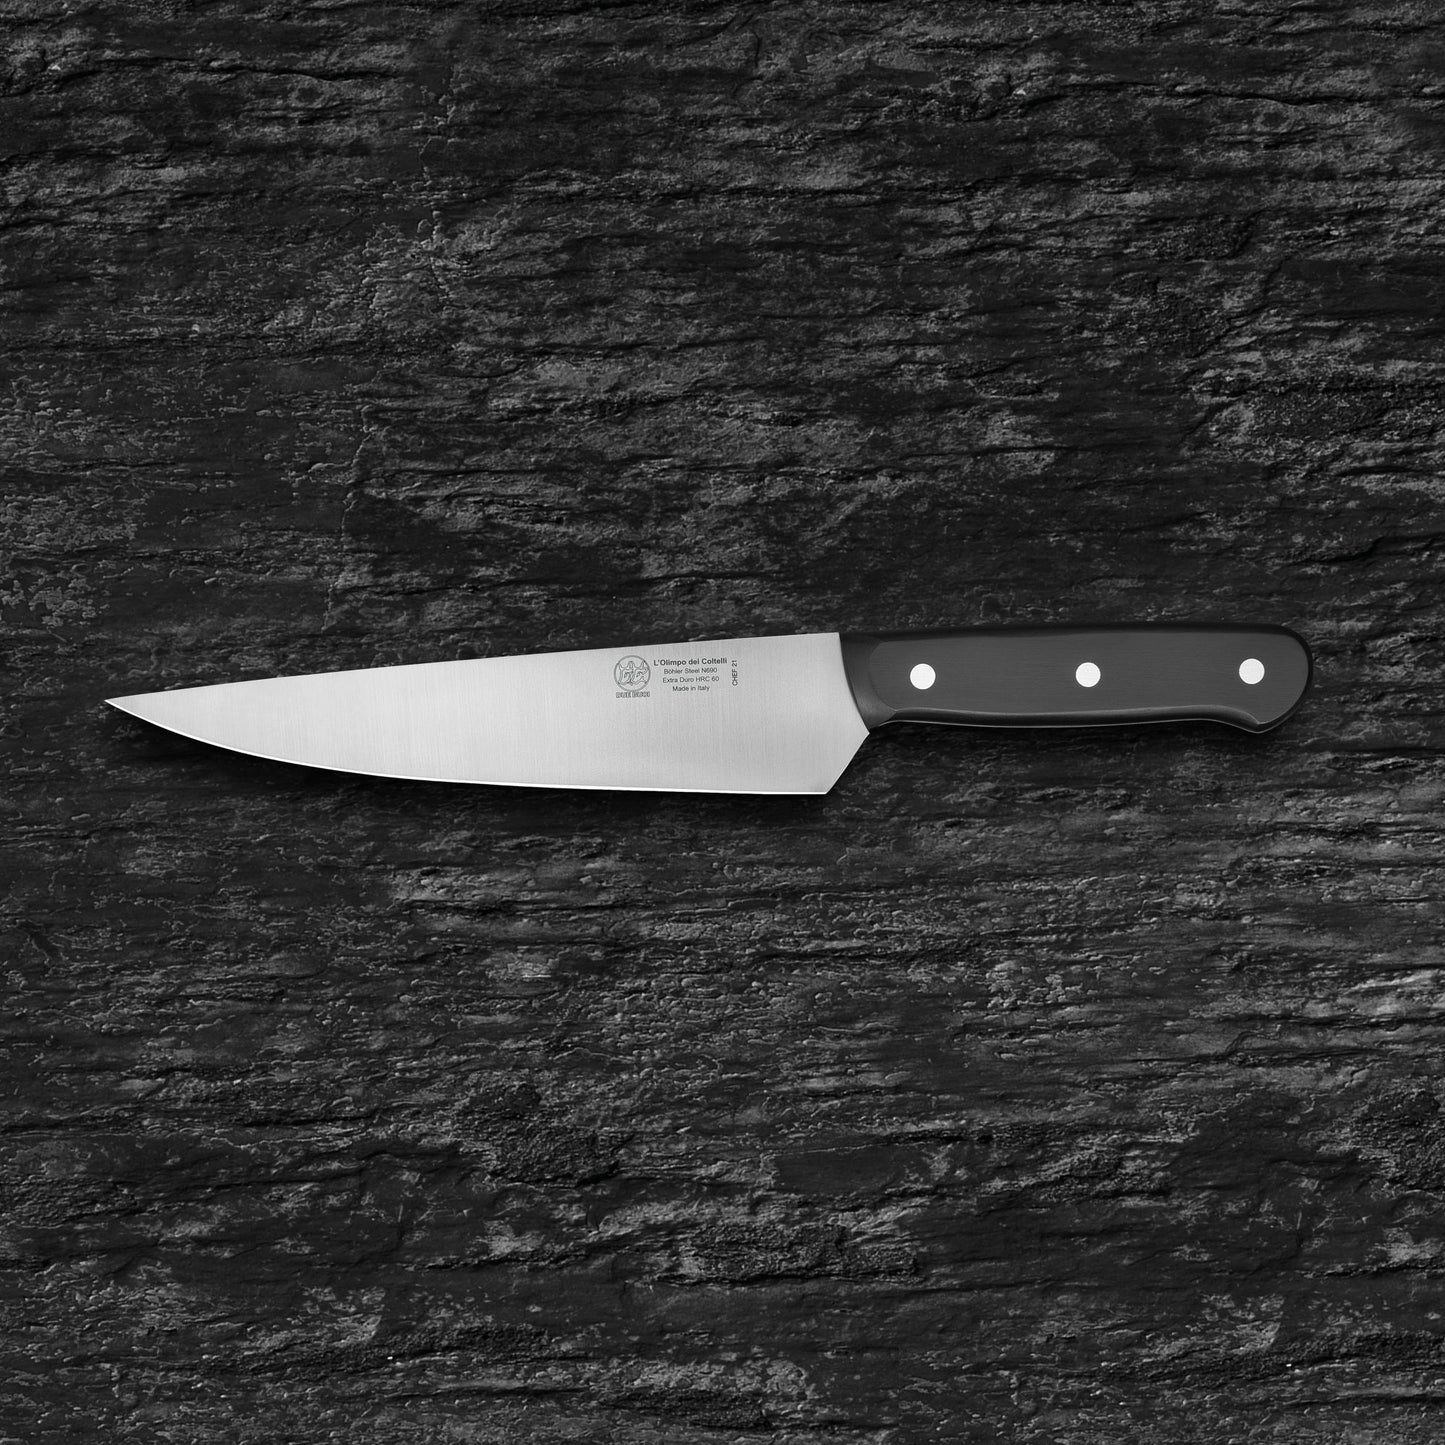 
                  
                    Chef Kitchen Knife - Blade 8.26" - N690 Stainless Steel - Hrc 60 - Black Technical Polymer Handle
                  
                